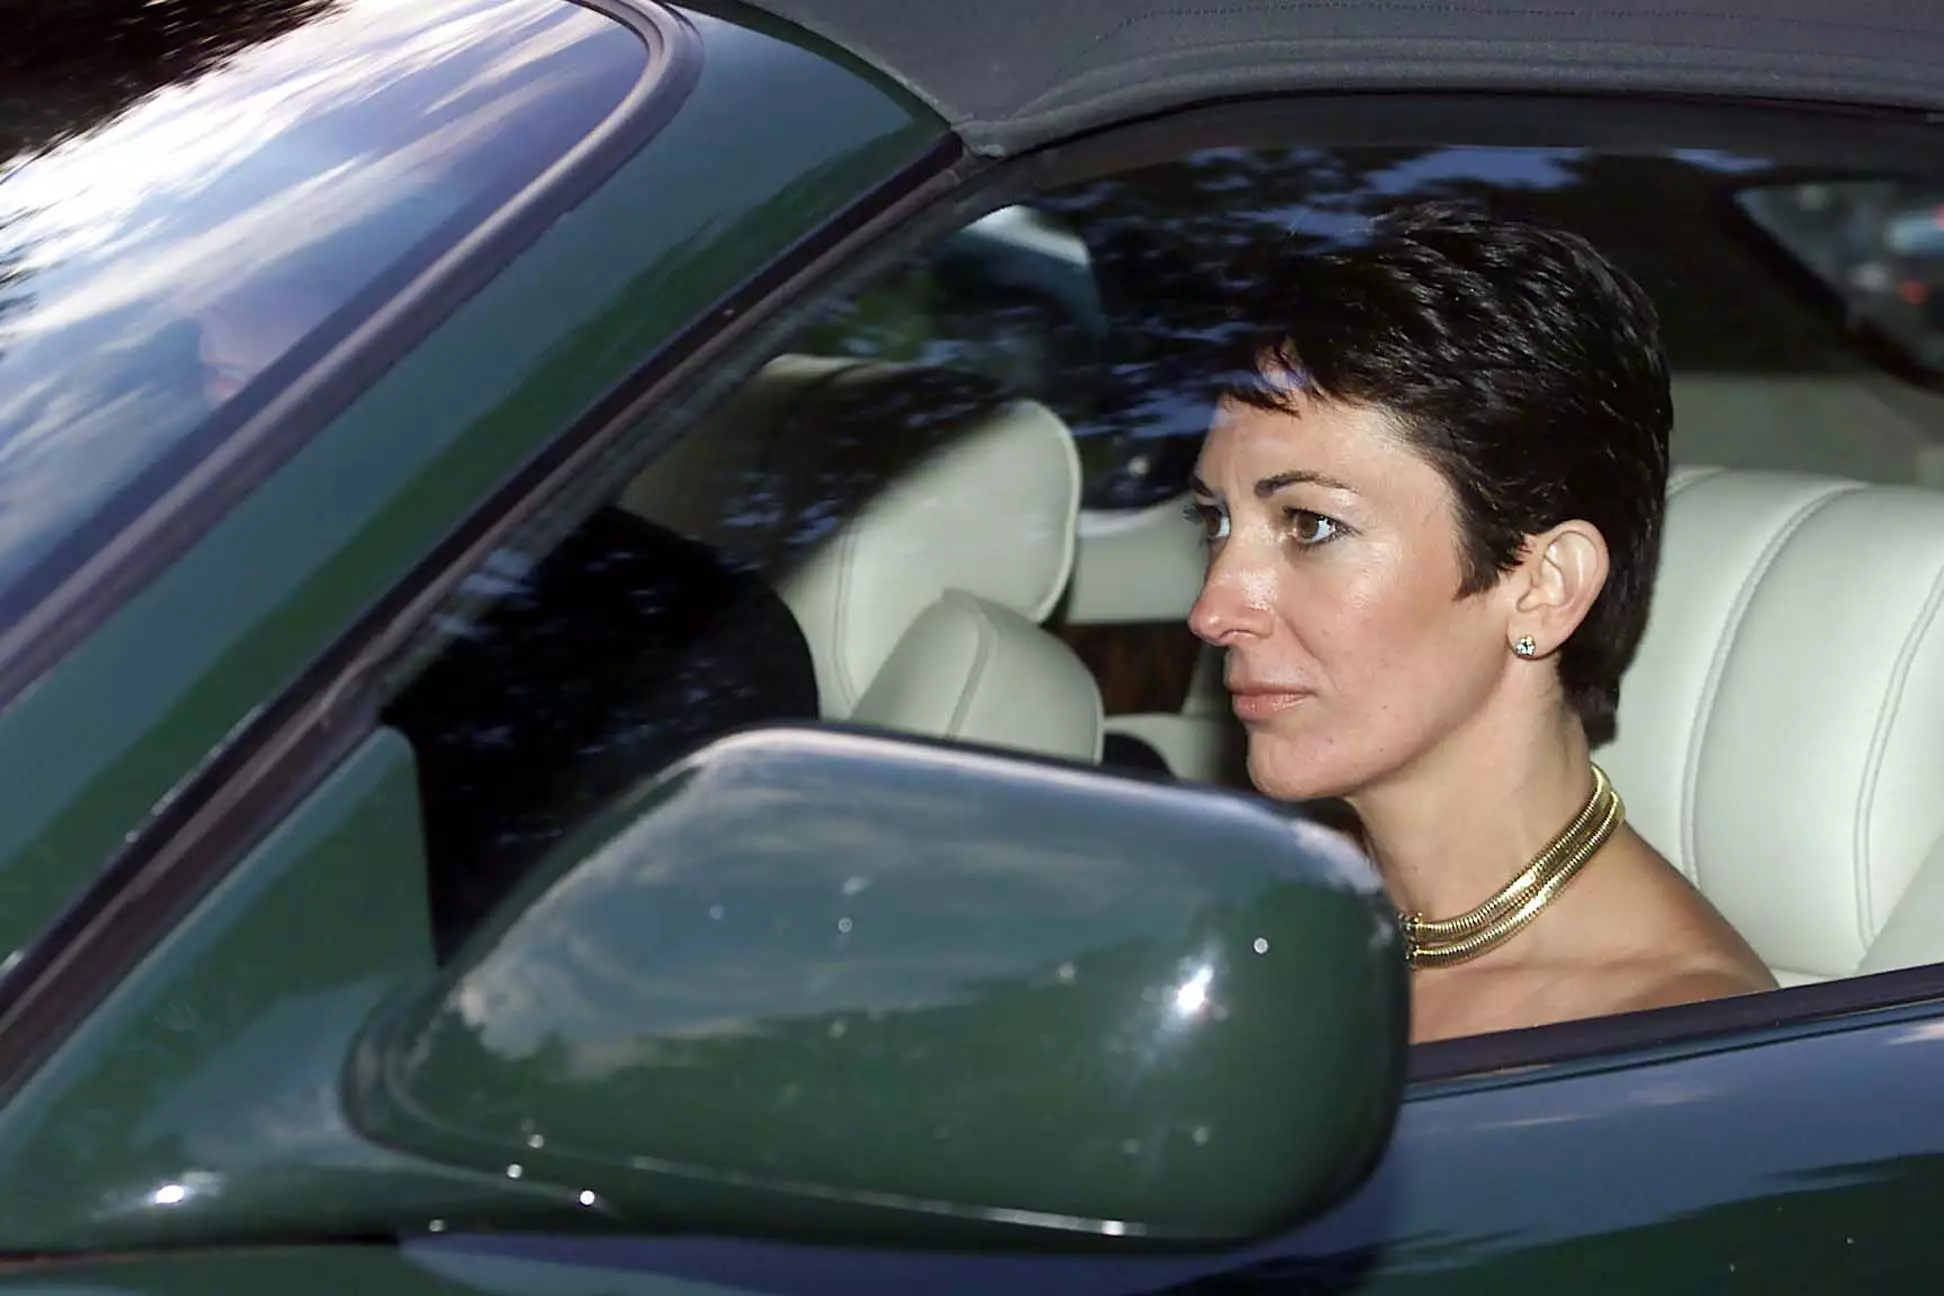 Ghislaine Maxwell was arrested in July this year (